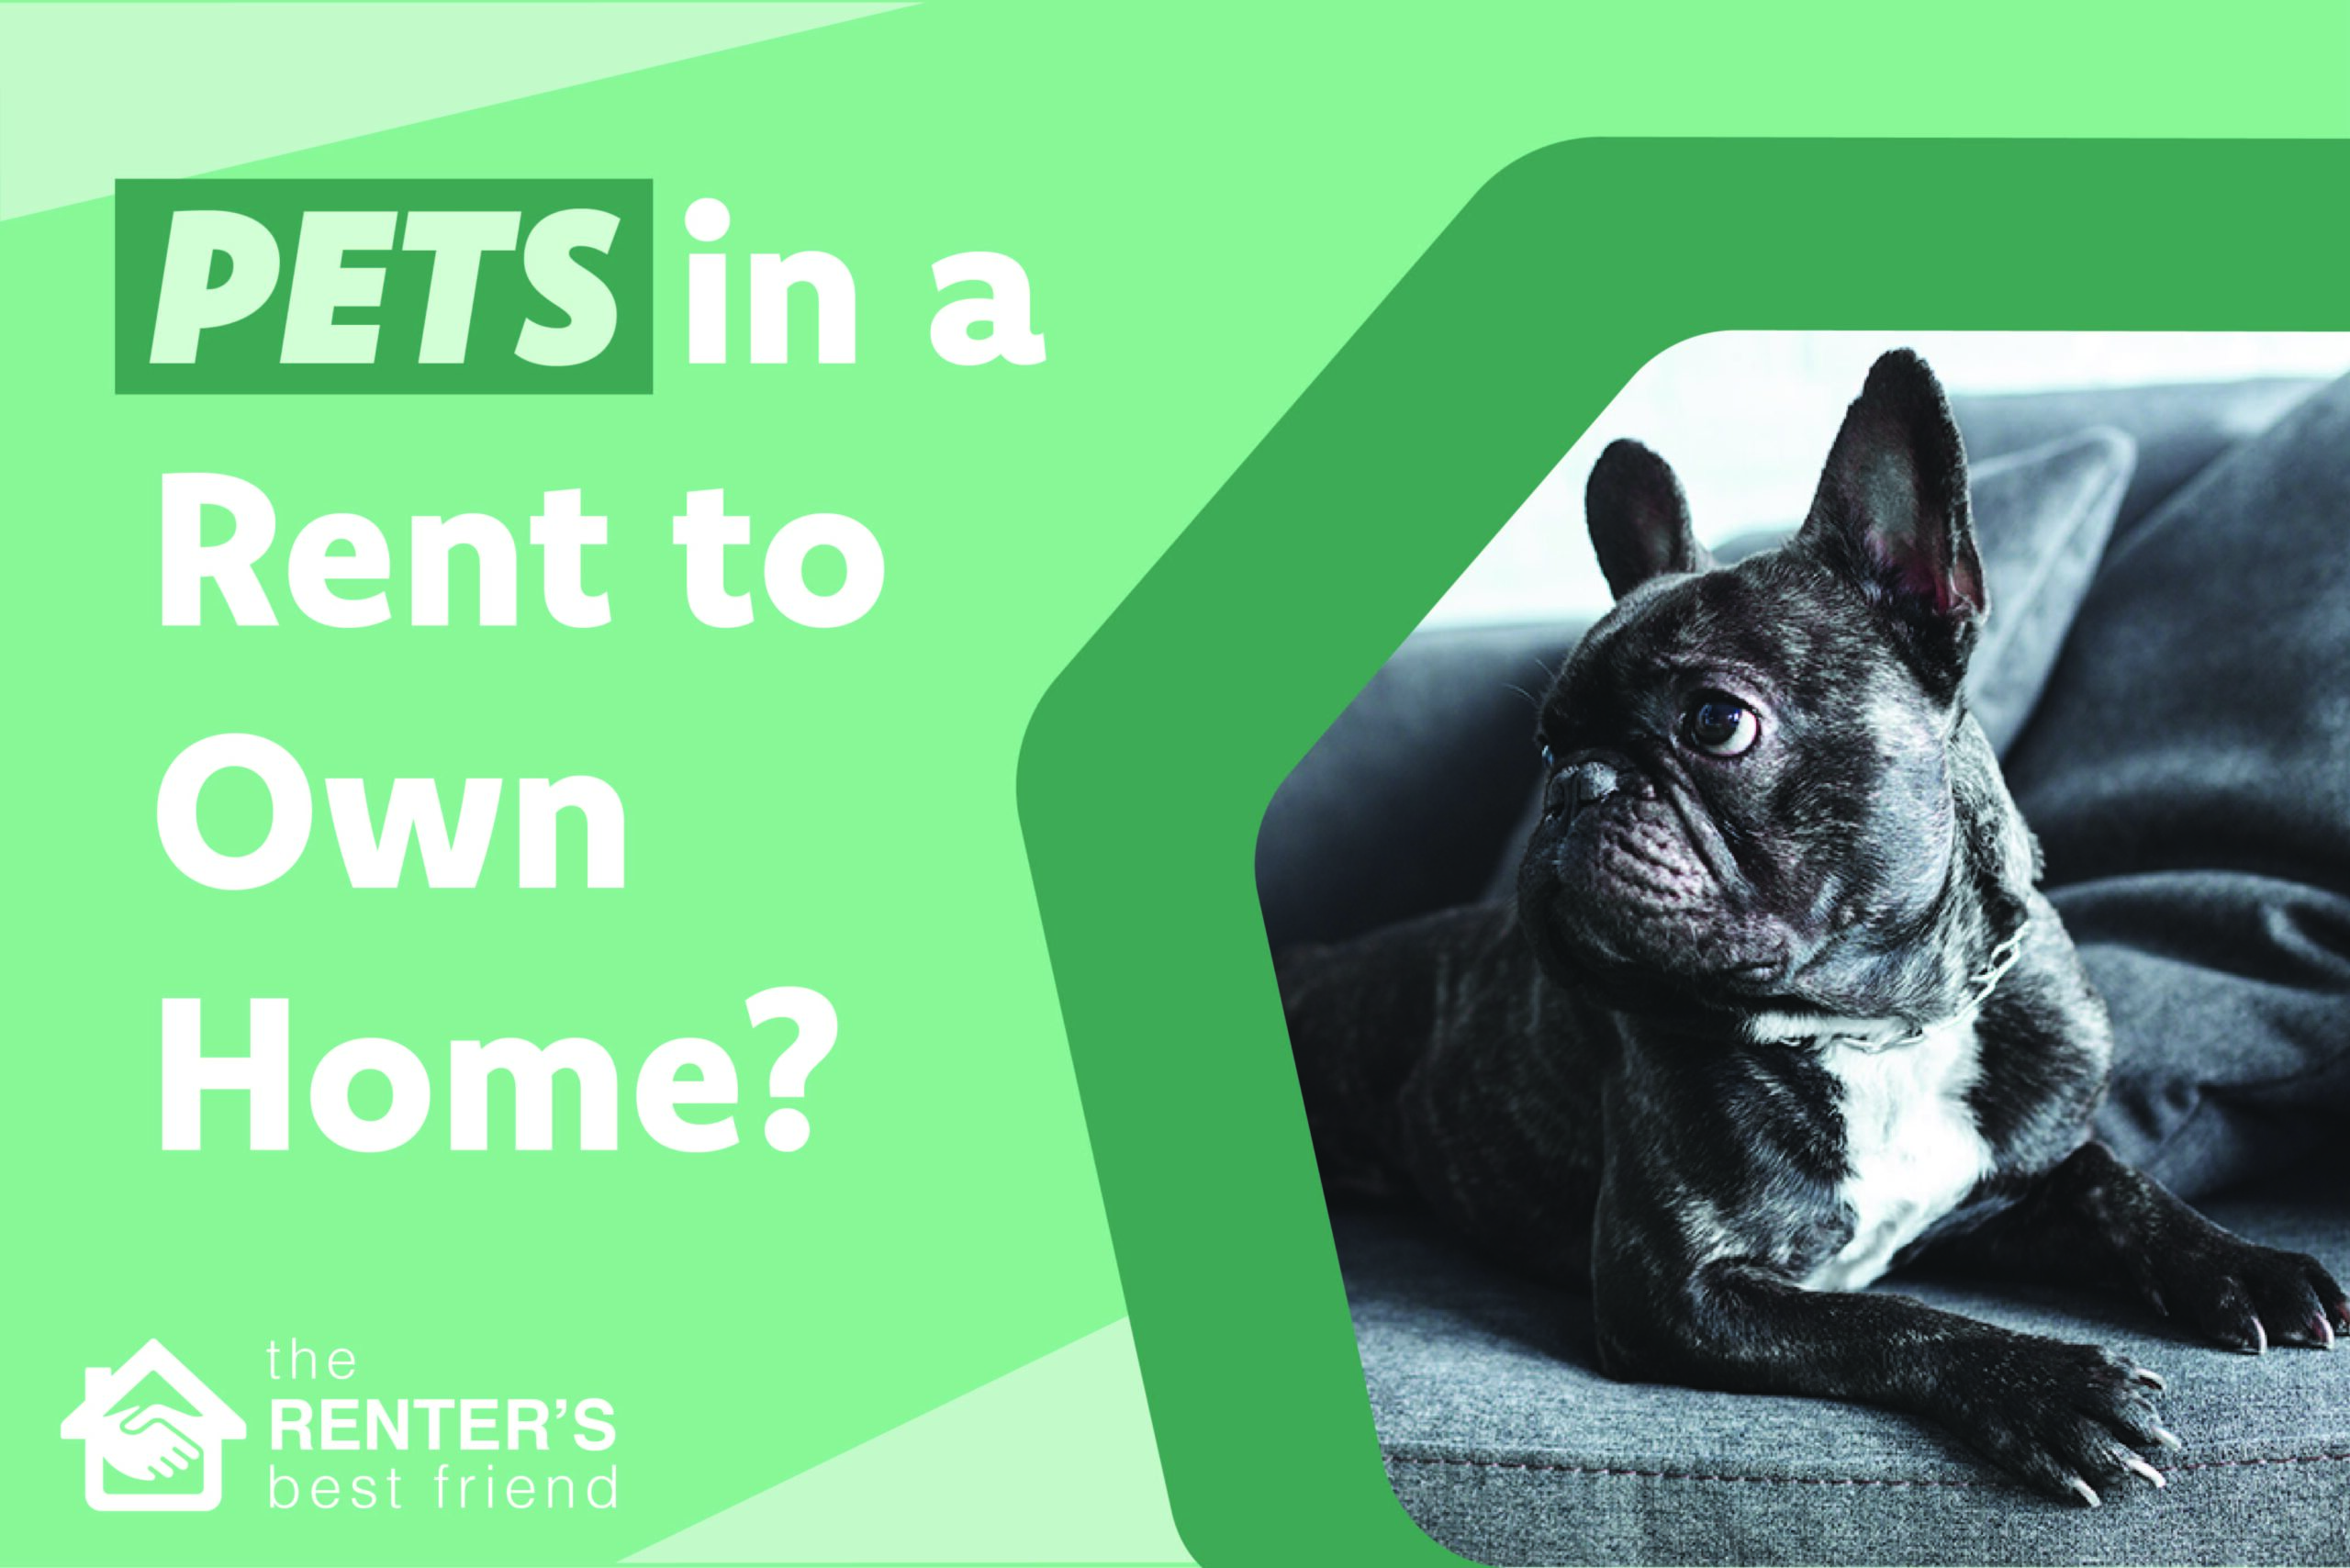 Pets in a rent to own home